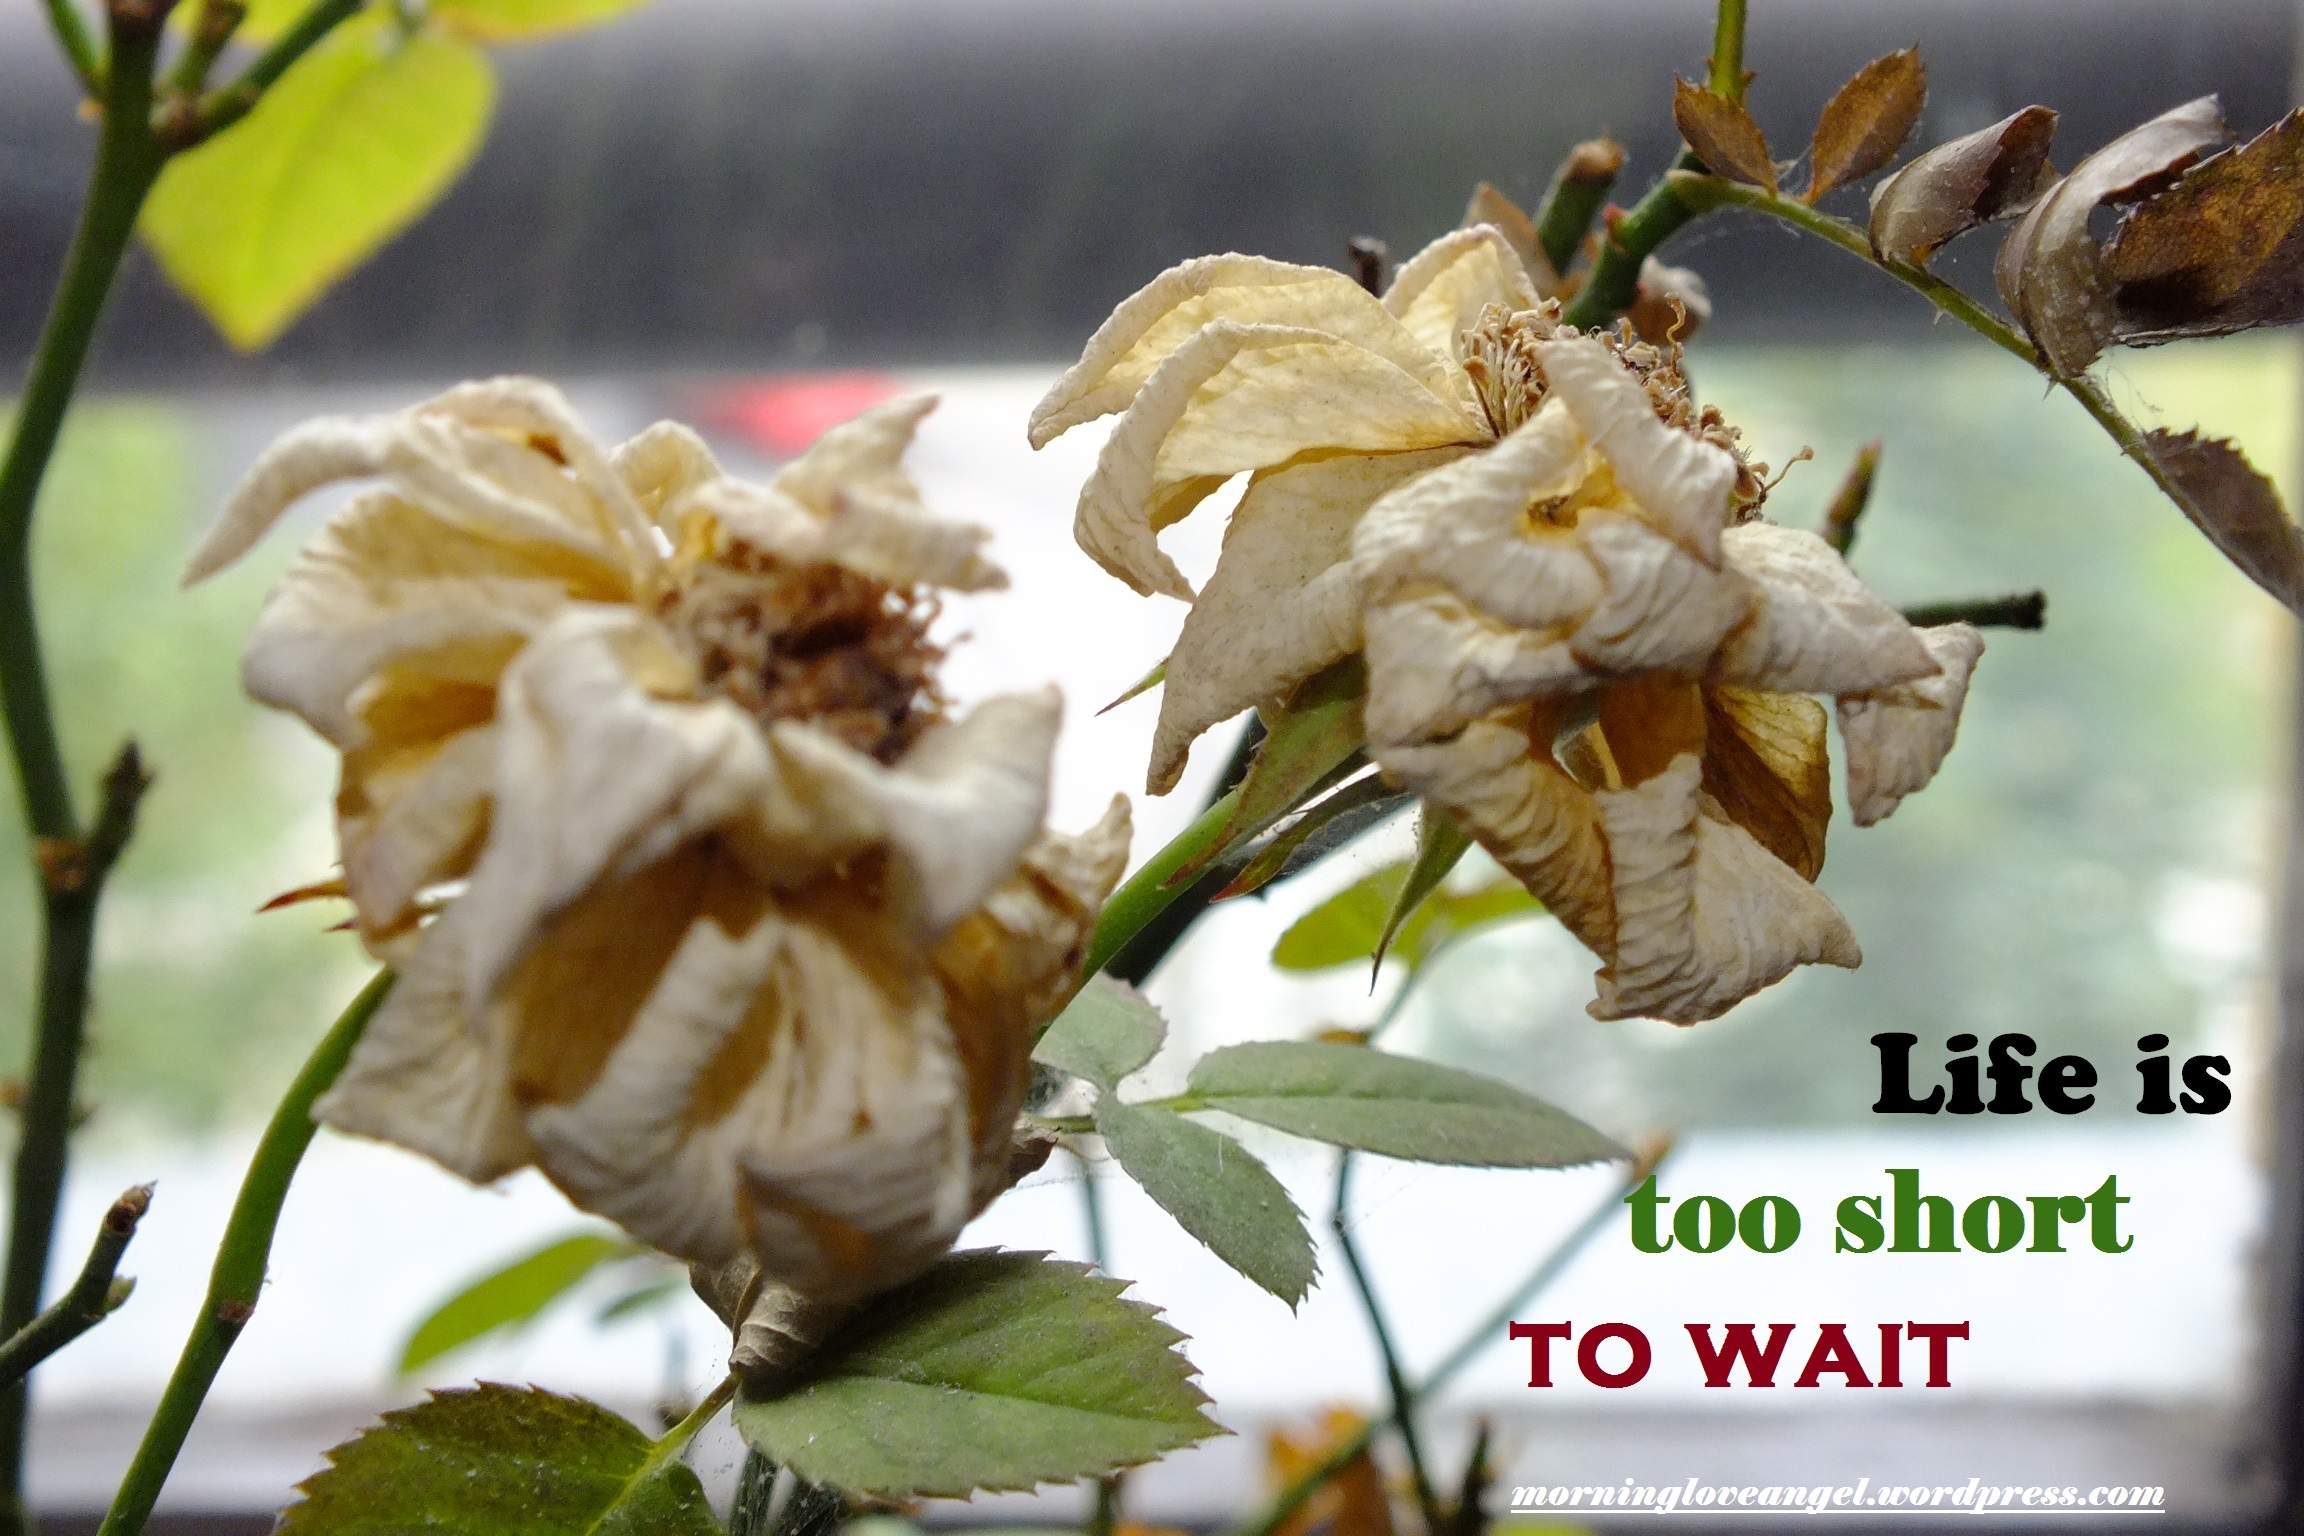 Life is TOO SHORT TO WAIT